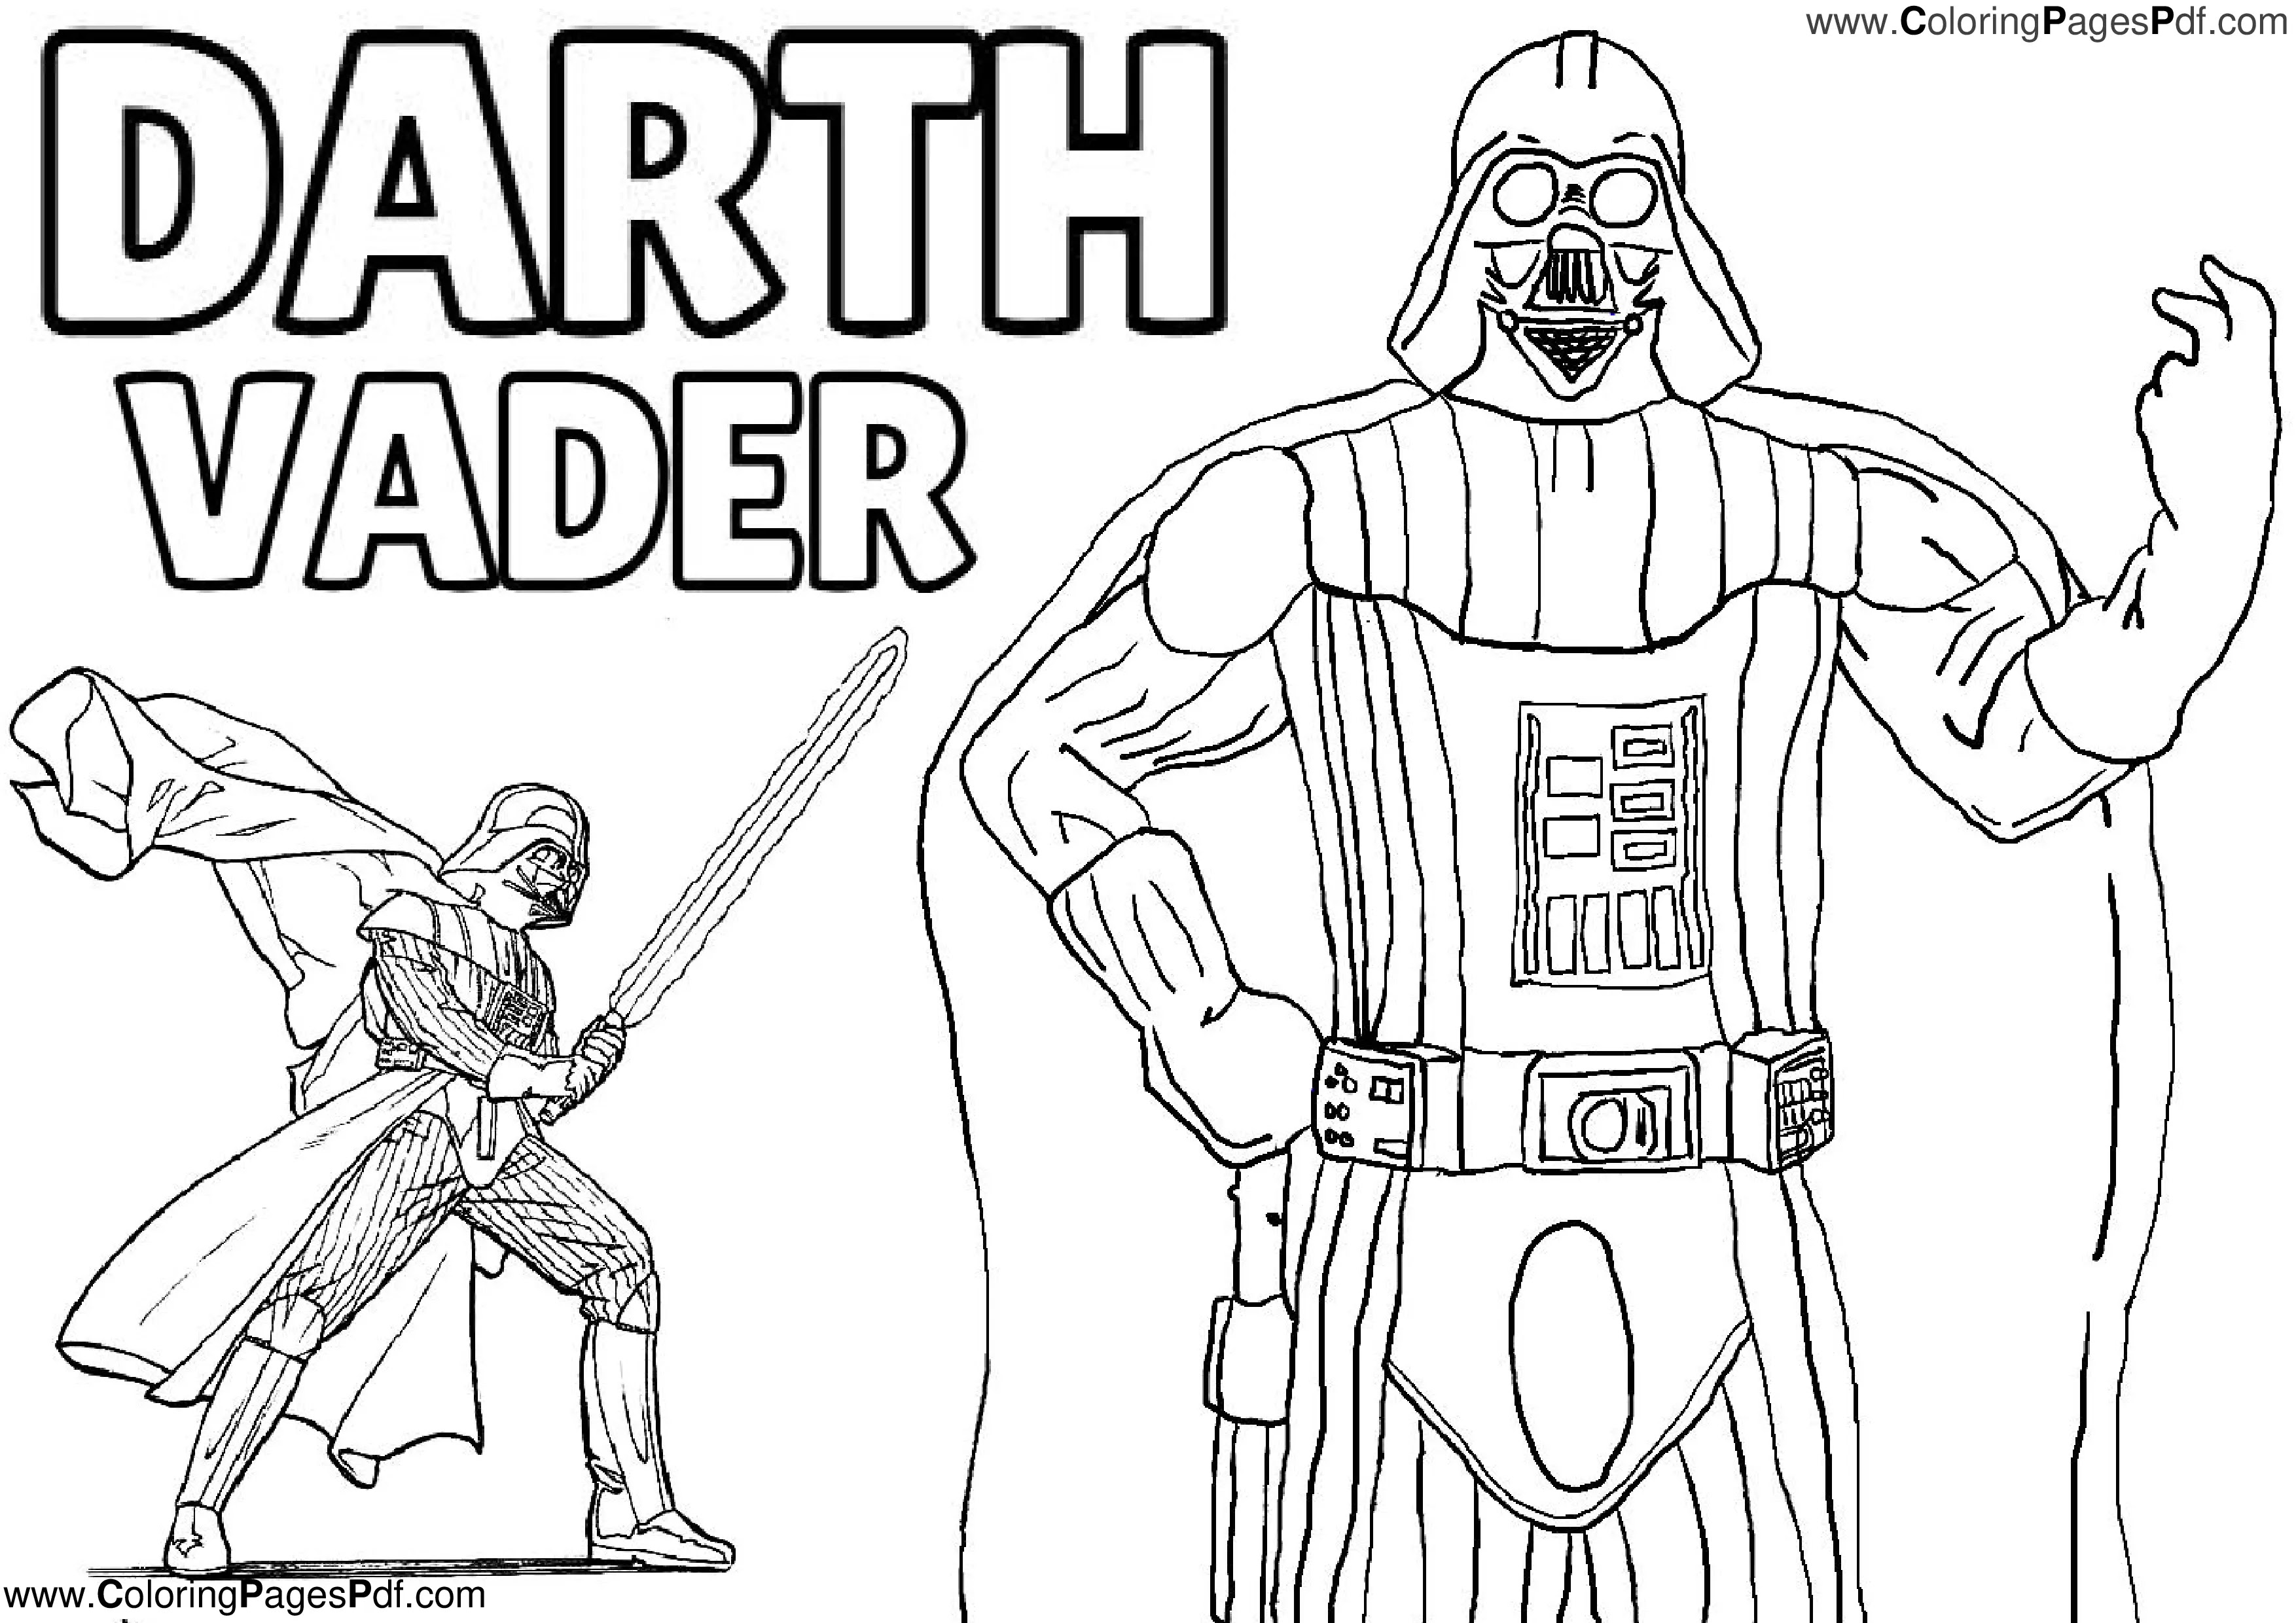 Darth Vader Coloring pages